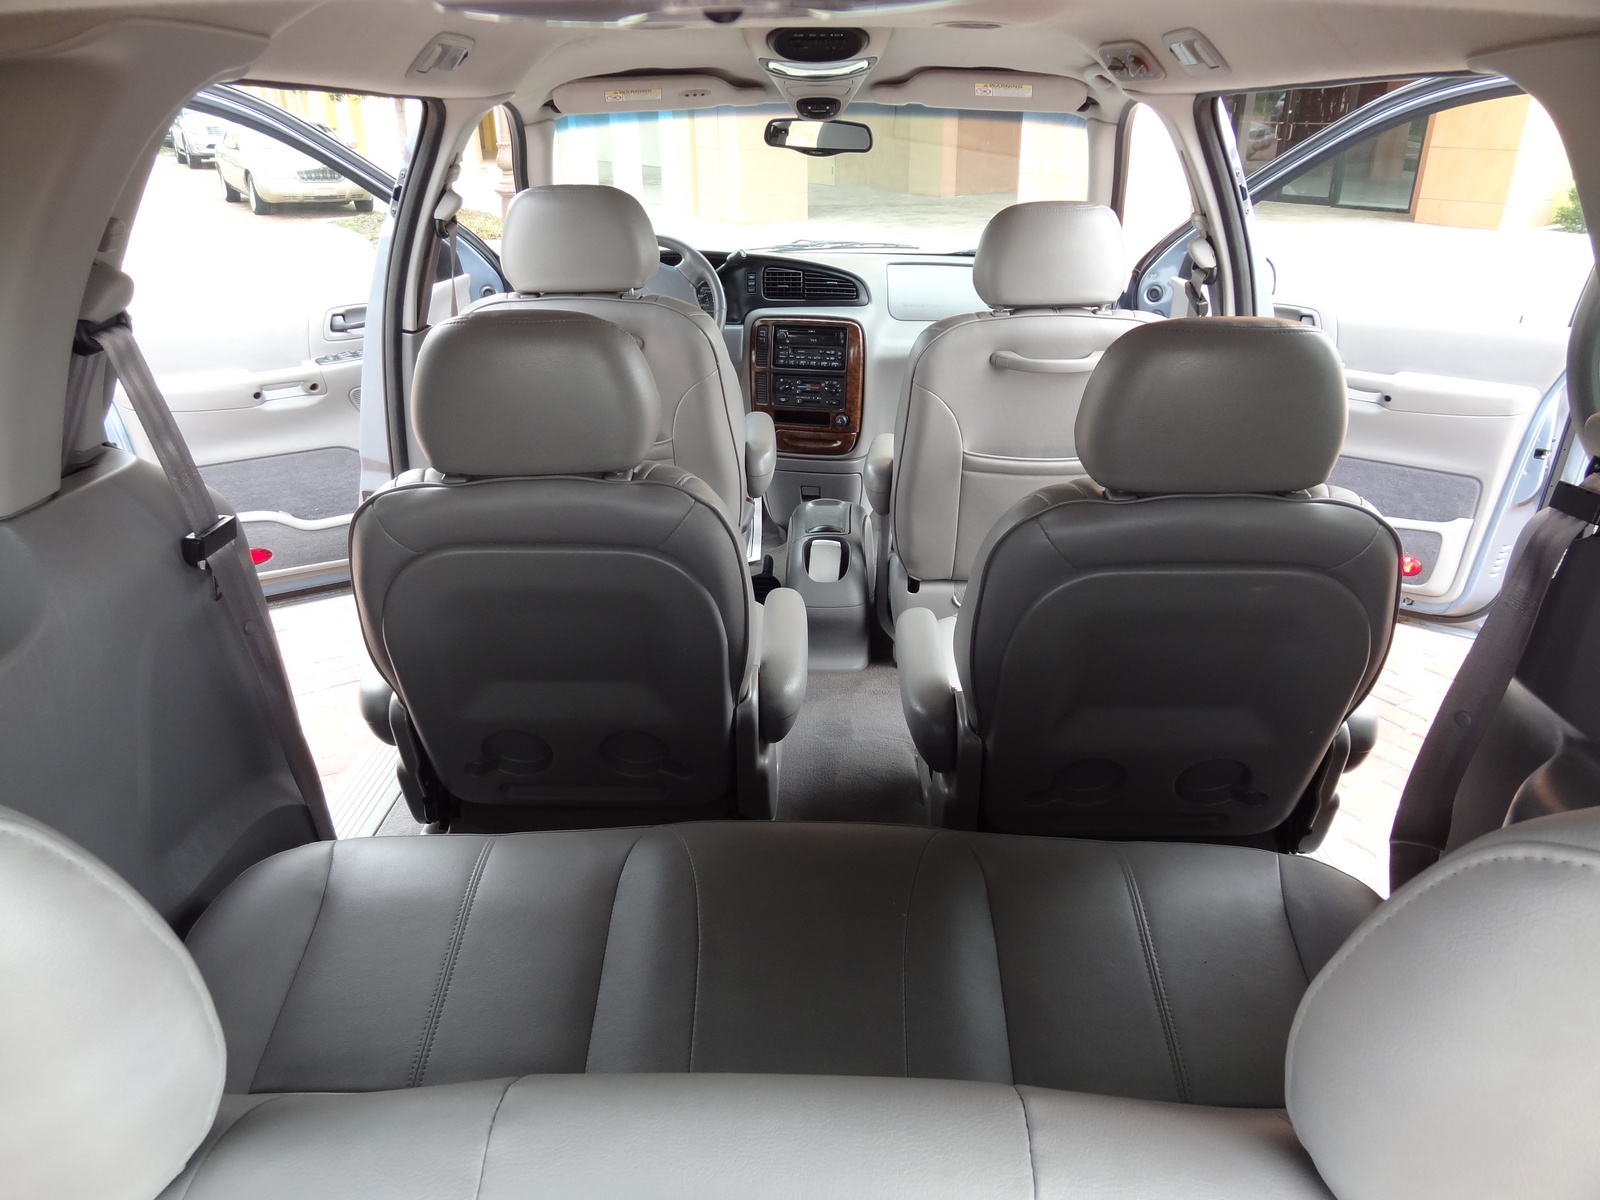 Ford windstar used seats #1